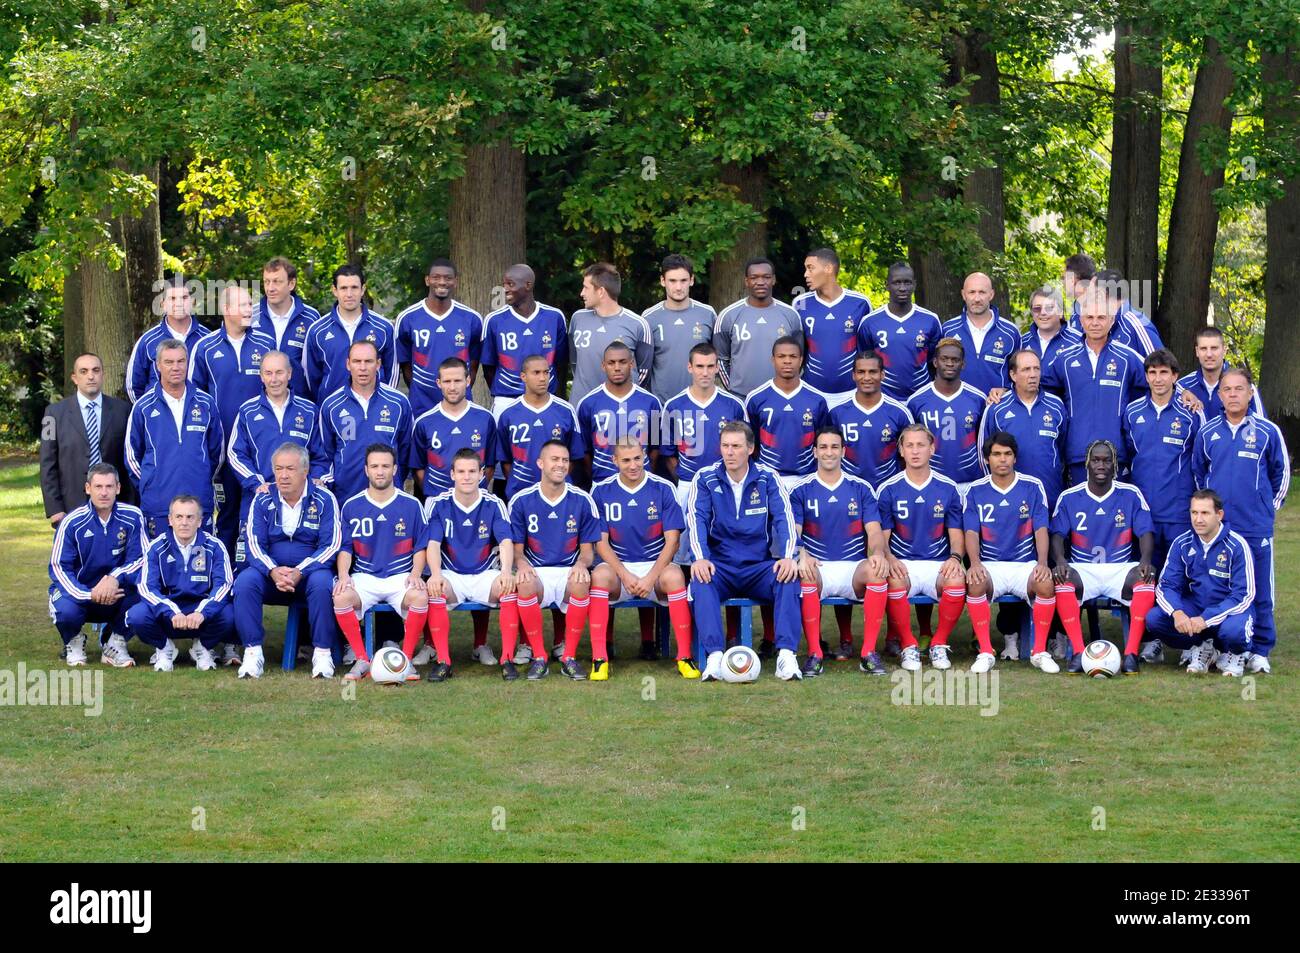 France's national official football team soccer players who are  participating in the Euro 2012 tournament pose for the official photo in  Clairefontaine, near Paris, France on August 31, 2010, 2008. In this